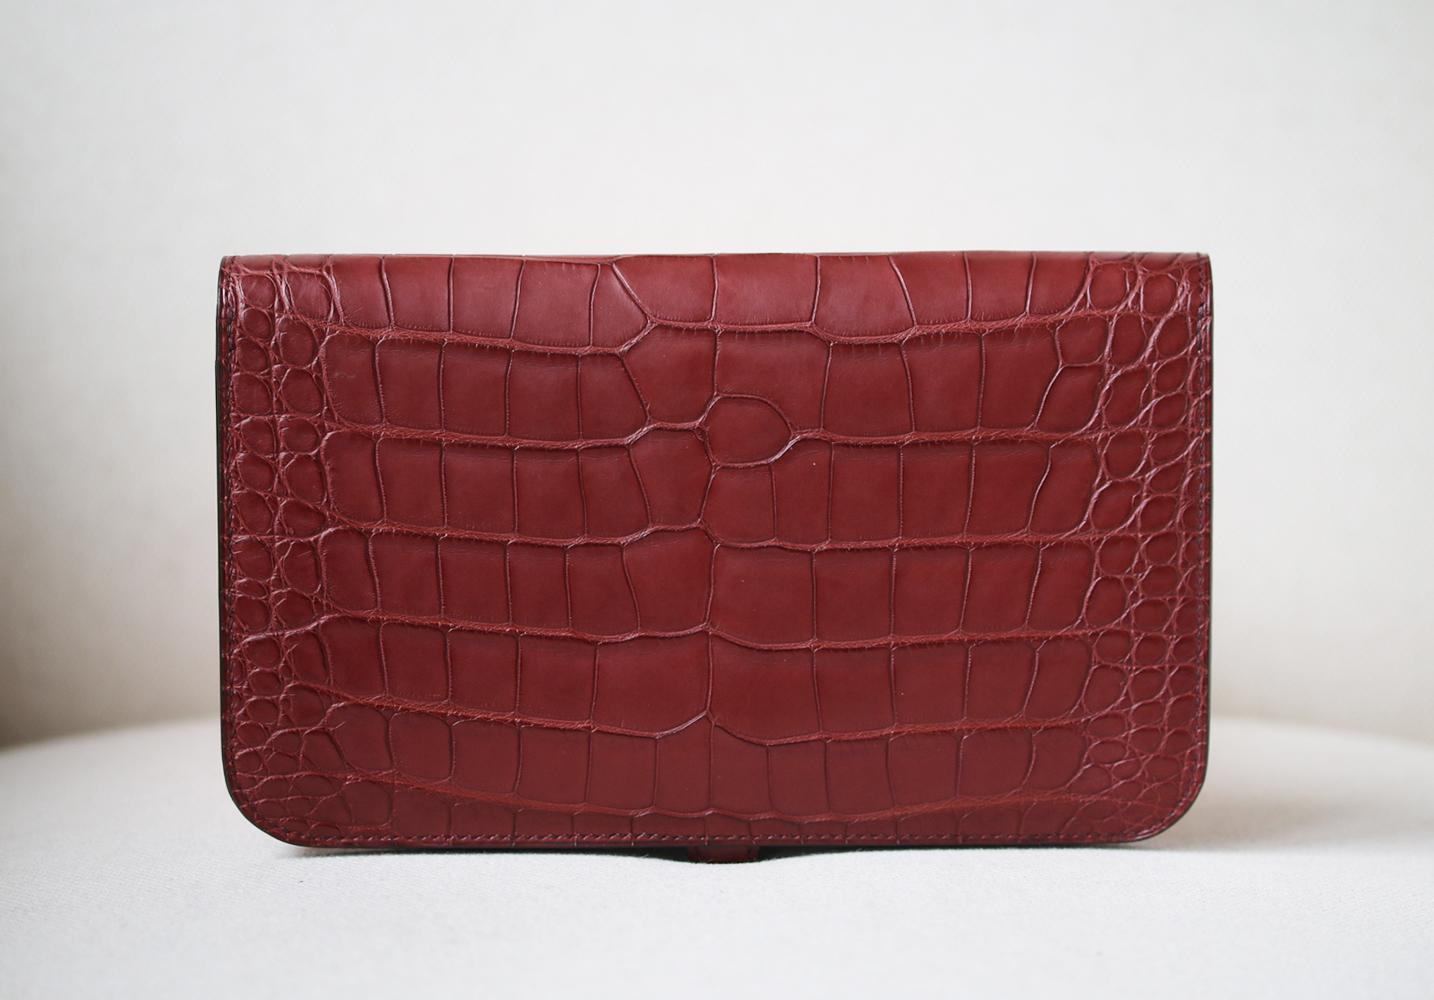 Wallet in Matte Bourgogne alligator-skin with lambskin lining. 5 credit card slots. 3 pockets. 1 removable change purse with zipper. Palladium plated Clou de Selle closure. Comes with original box. 

Dimensions: L 20.1 x H 12.5 x D 0.4